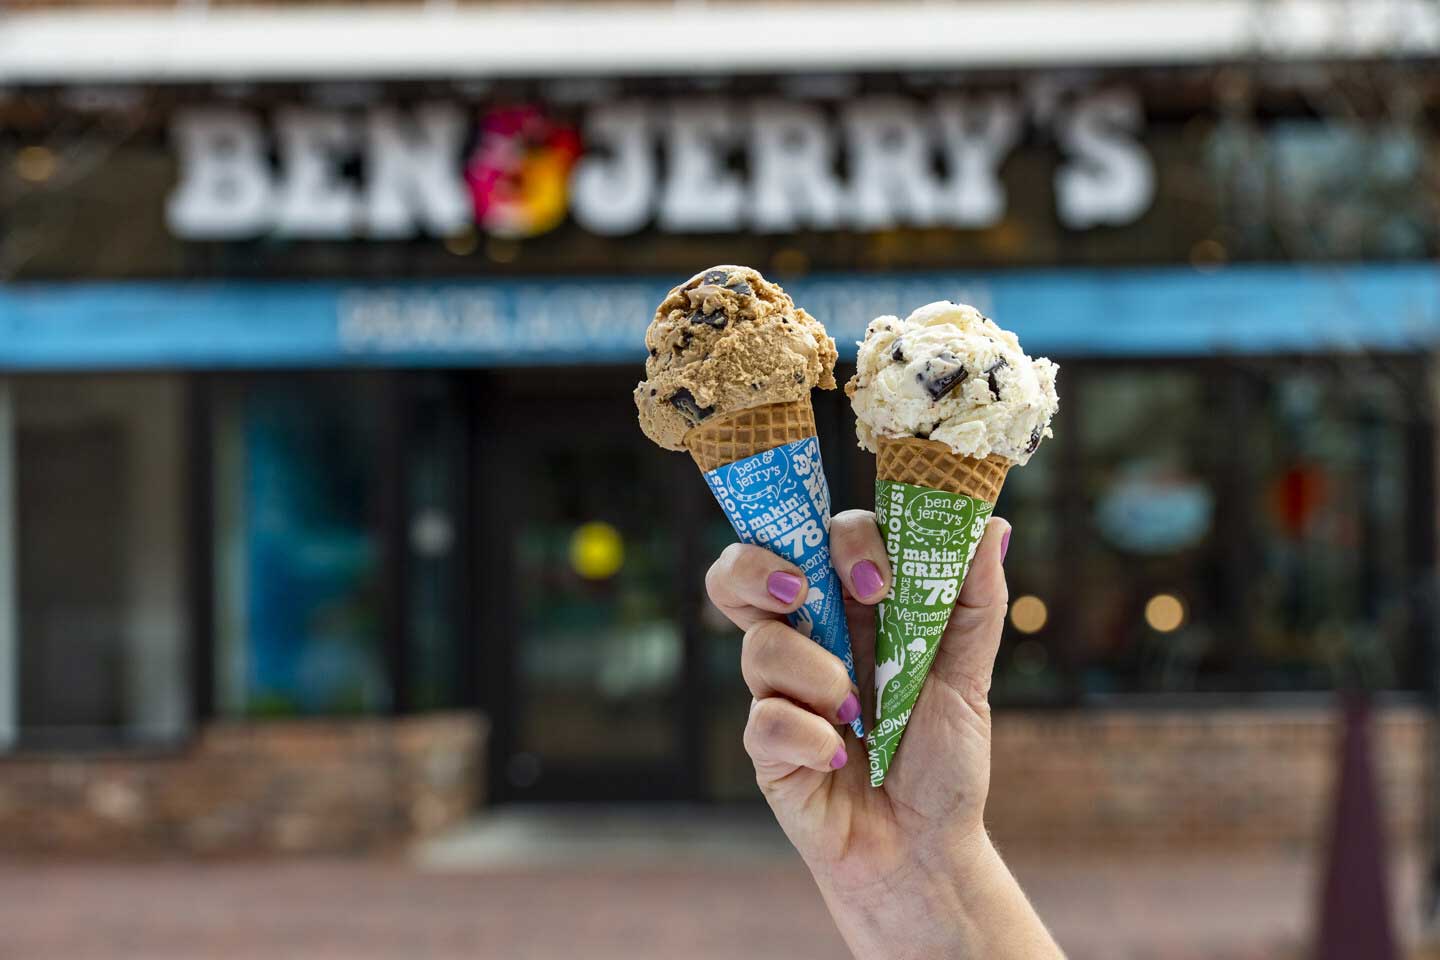 Ben & Jerry’s continues its annual tradition as a thanks to ice cream fans across the globe with Free Cone Day An estimated 1 million cones to be given away at the tradition which is over 40 years old.